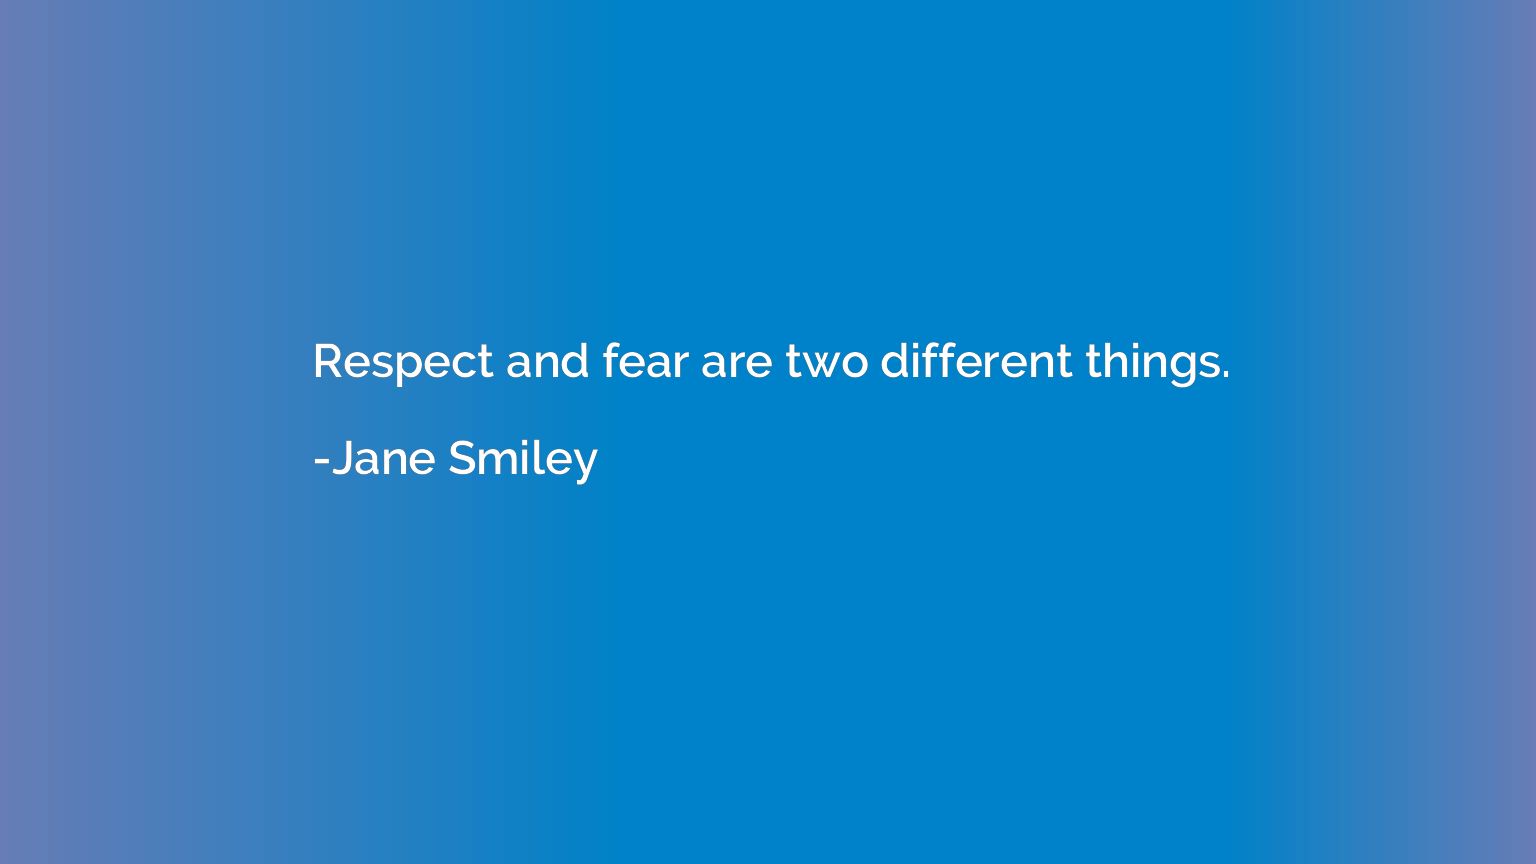 Respect and fear are two different things.